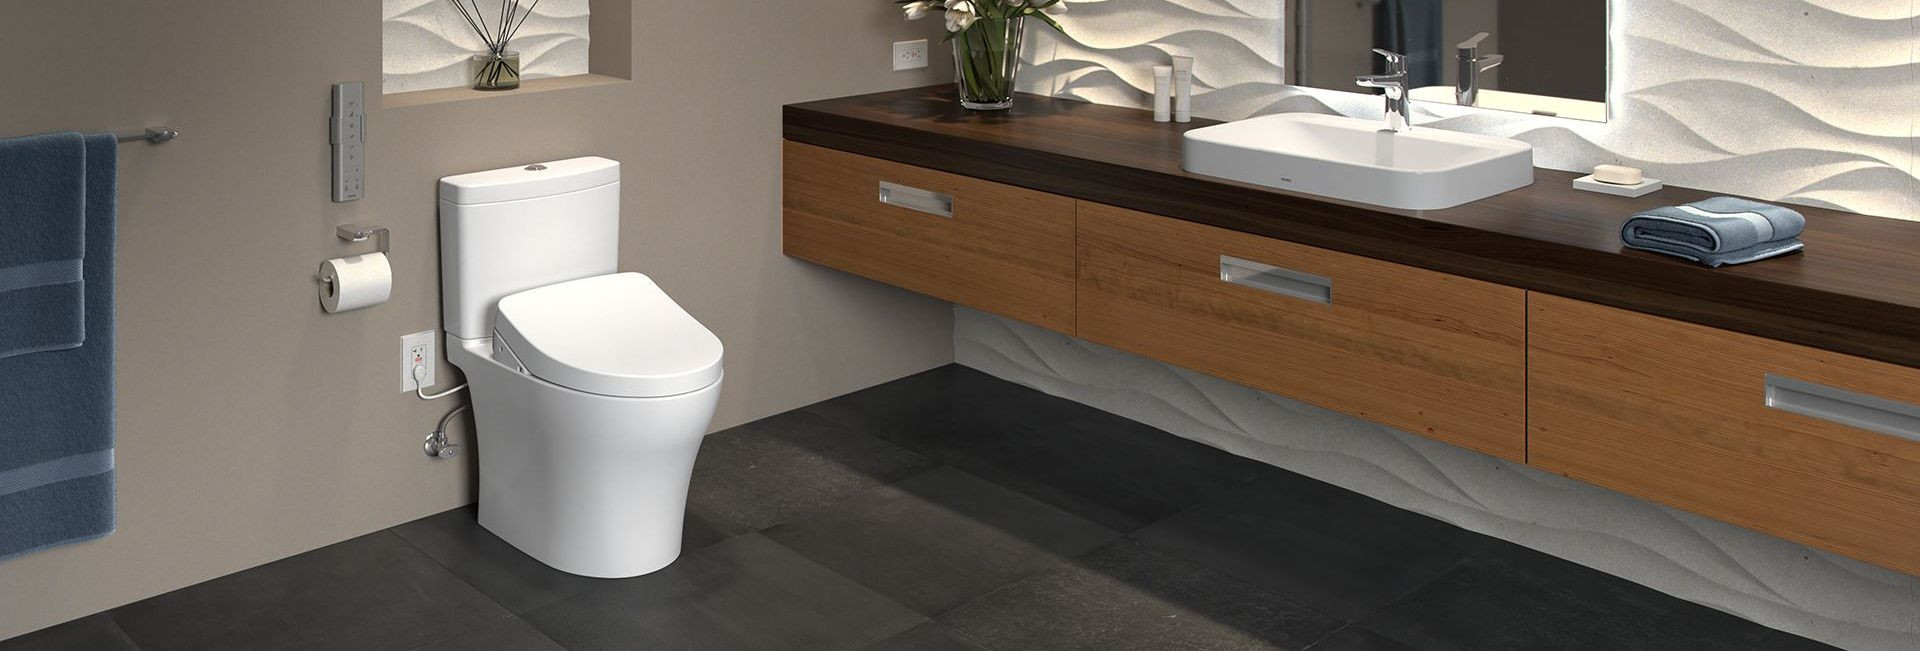 Best Toilet For Small Bathroom
 8 Best Toilets for Small Bathroom Dec 2019 Reviews